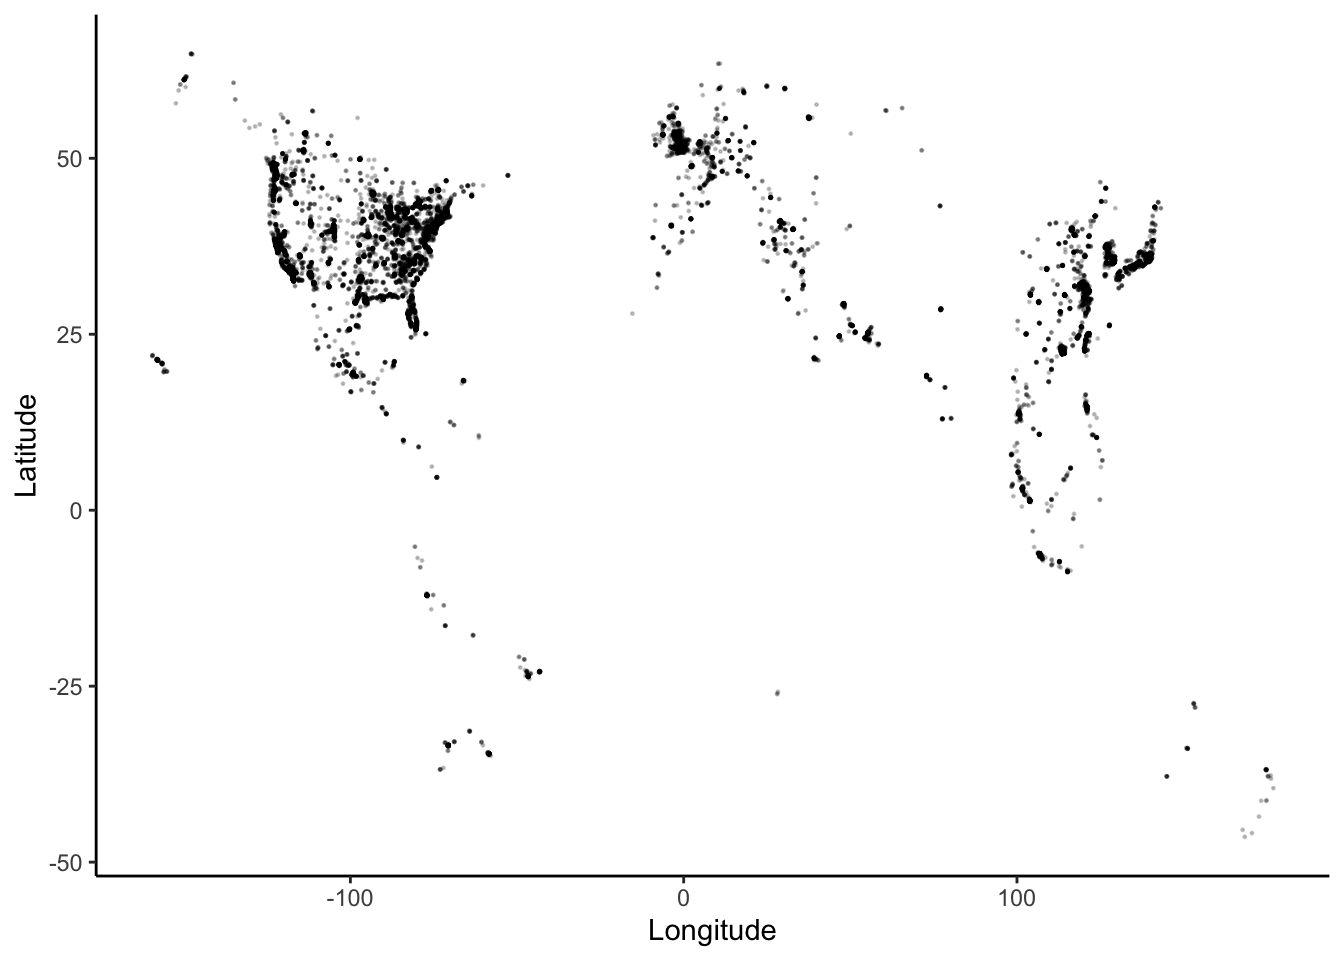 Scatterplot of Starbucks locations at time of data collection. Starbucks is a global company with locations on most continents.